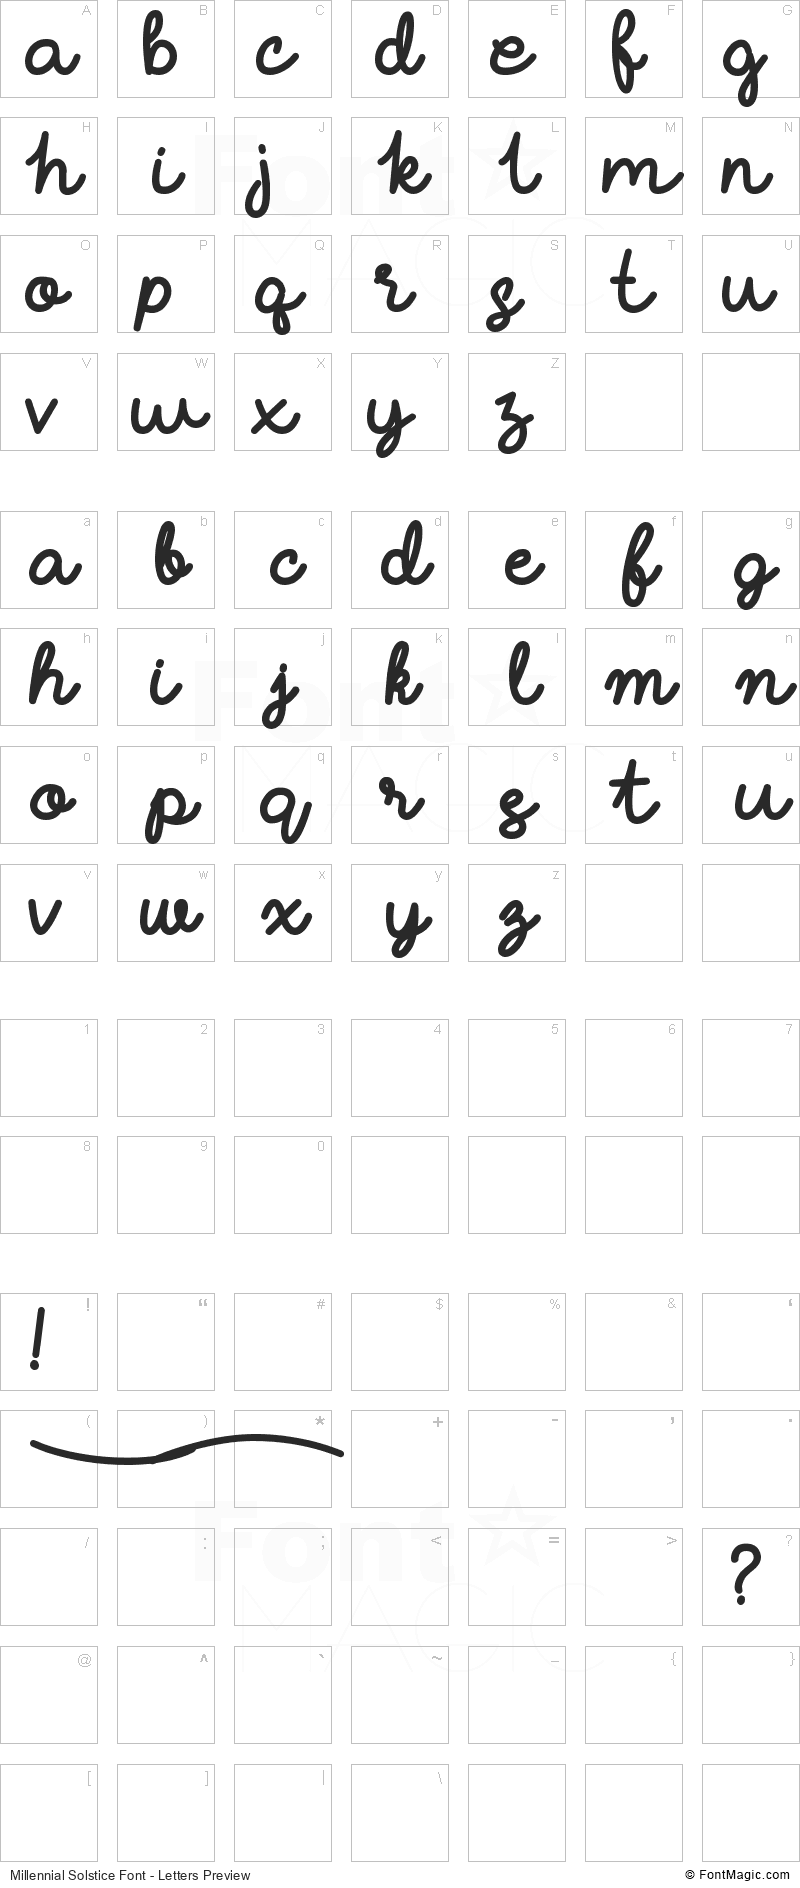 Millennial Solstice Font - All Latters Preview Chart